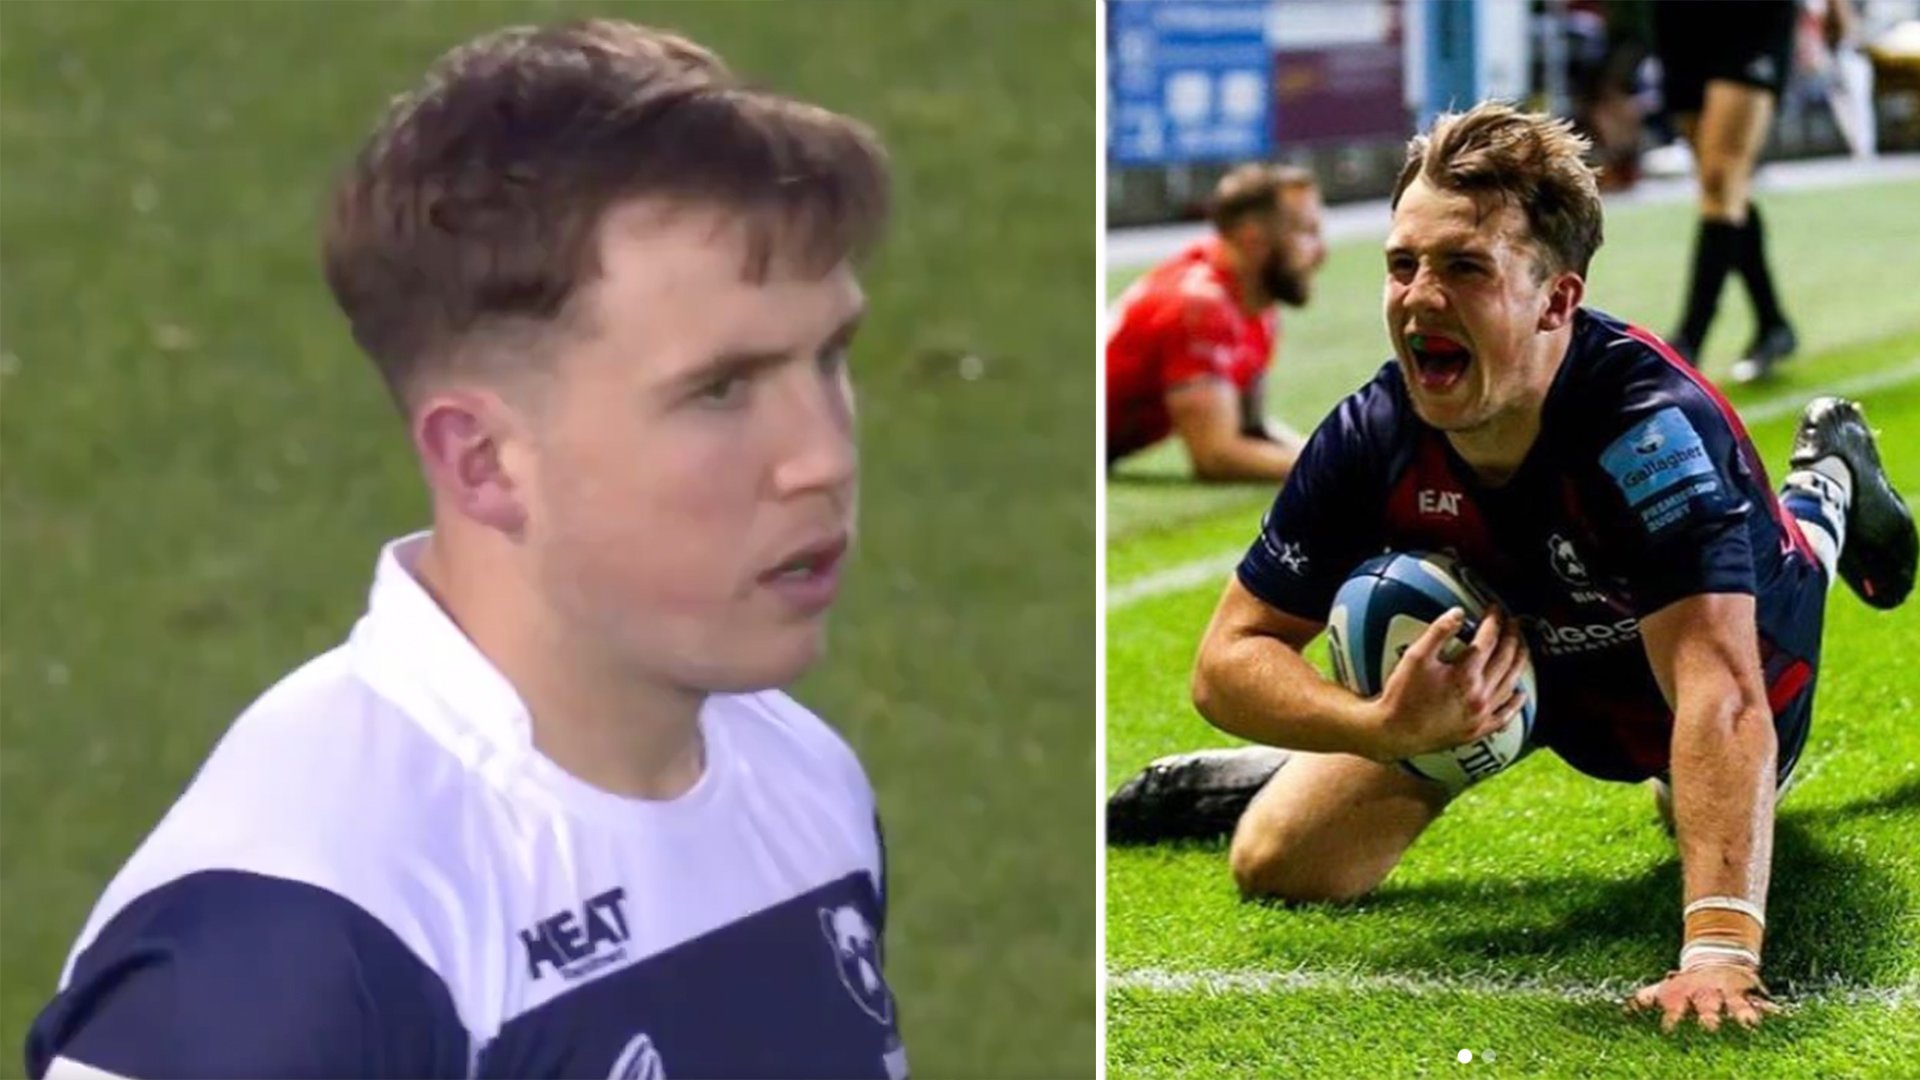 The 18-year-old wonder kid who is keeping Ian Madigan out of the Bristol Bears team